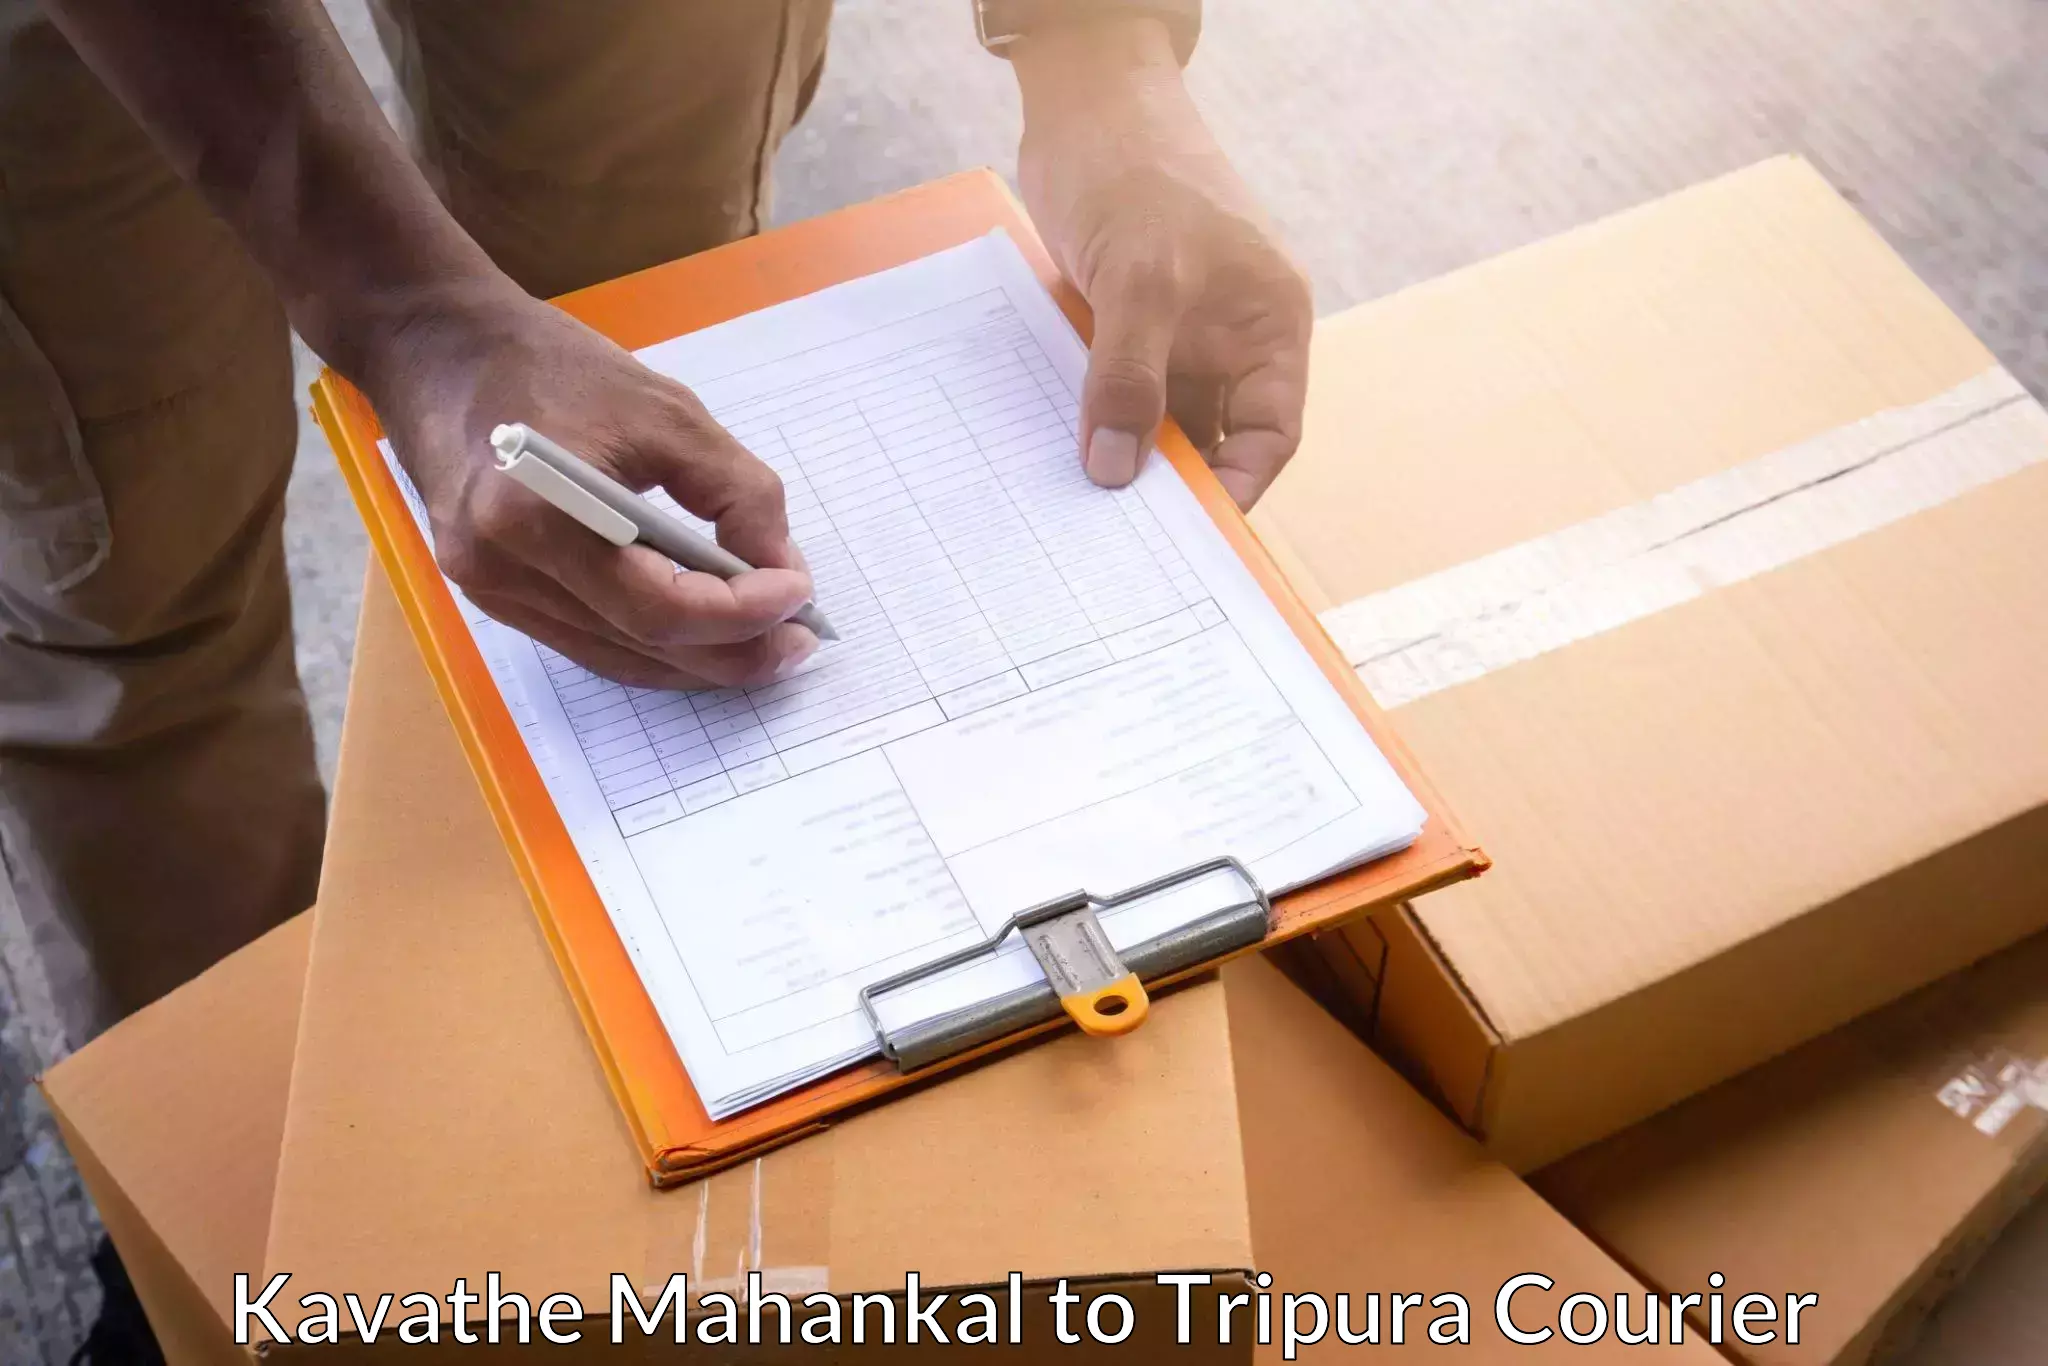 Efficient package consolidation in Kavathe Mahankal to Dhalai